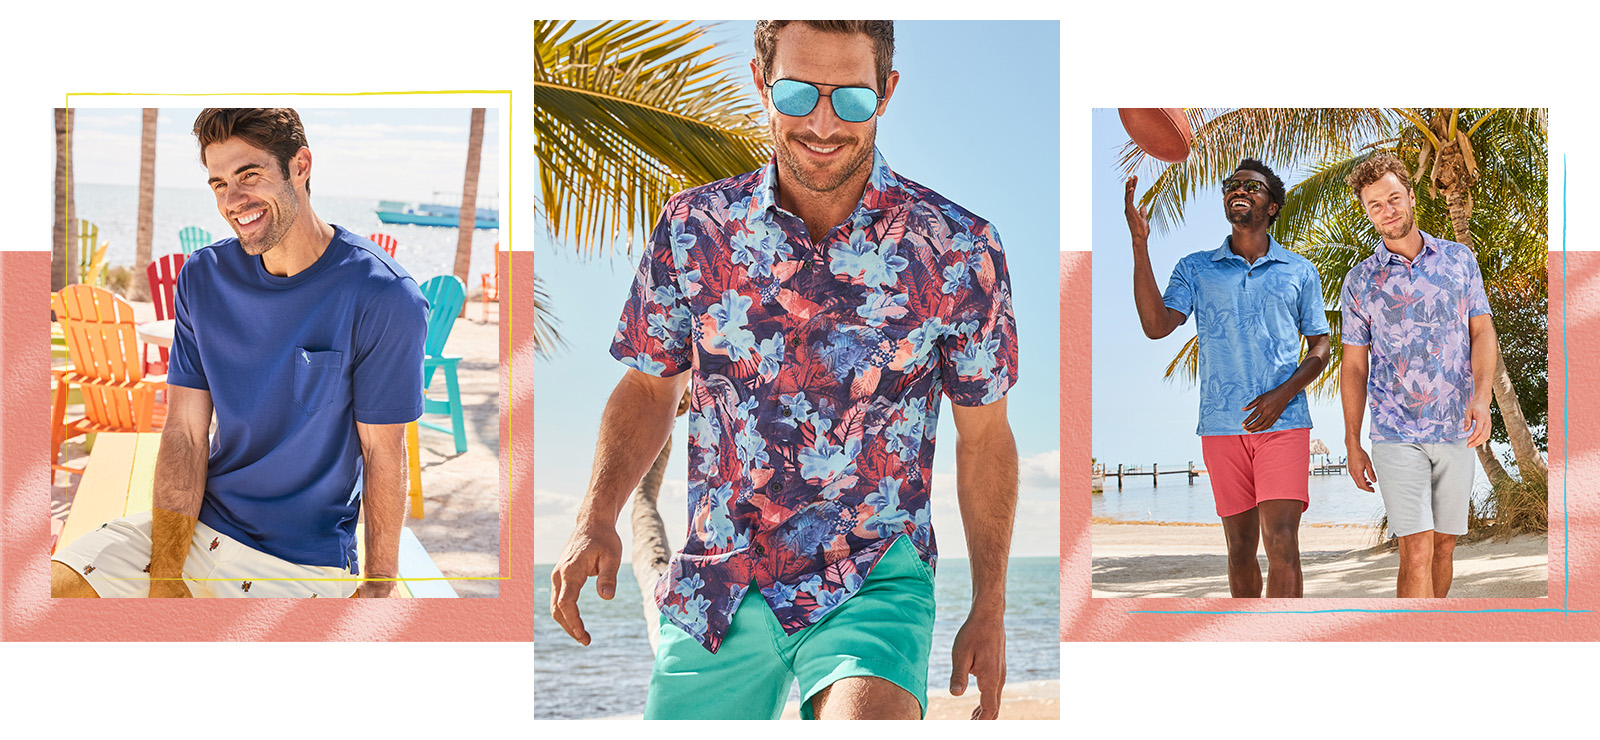 Kick off your next beach day in new styles built for sunny days and a life at play. 